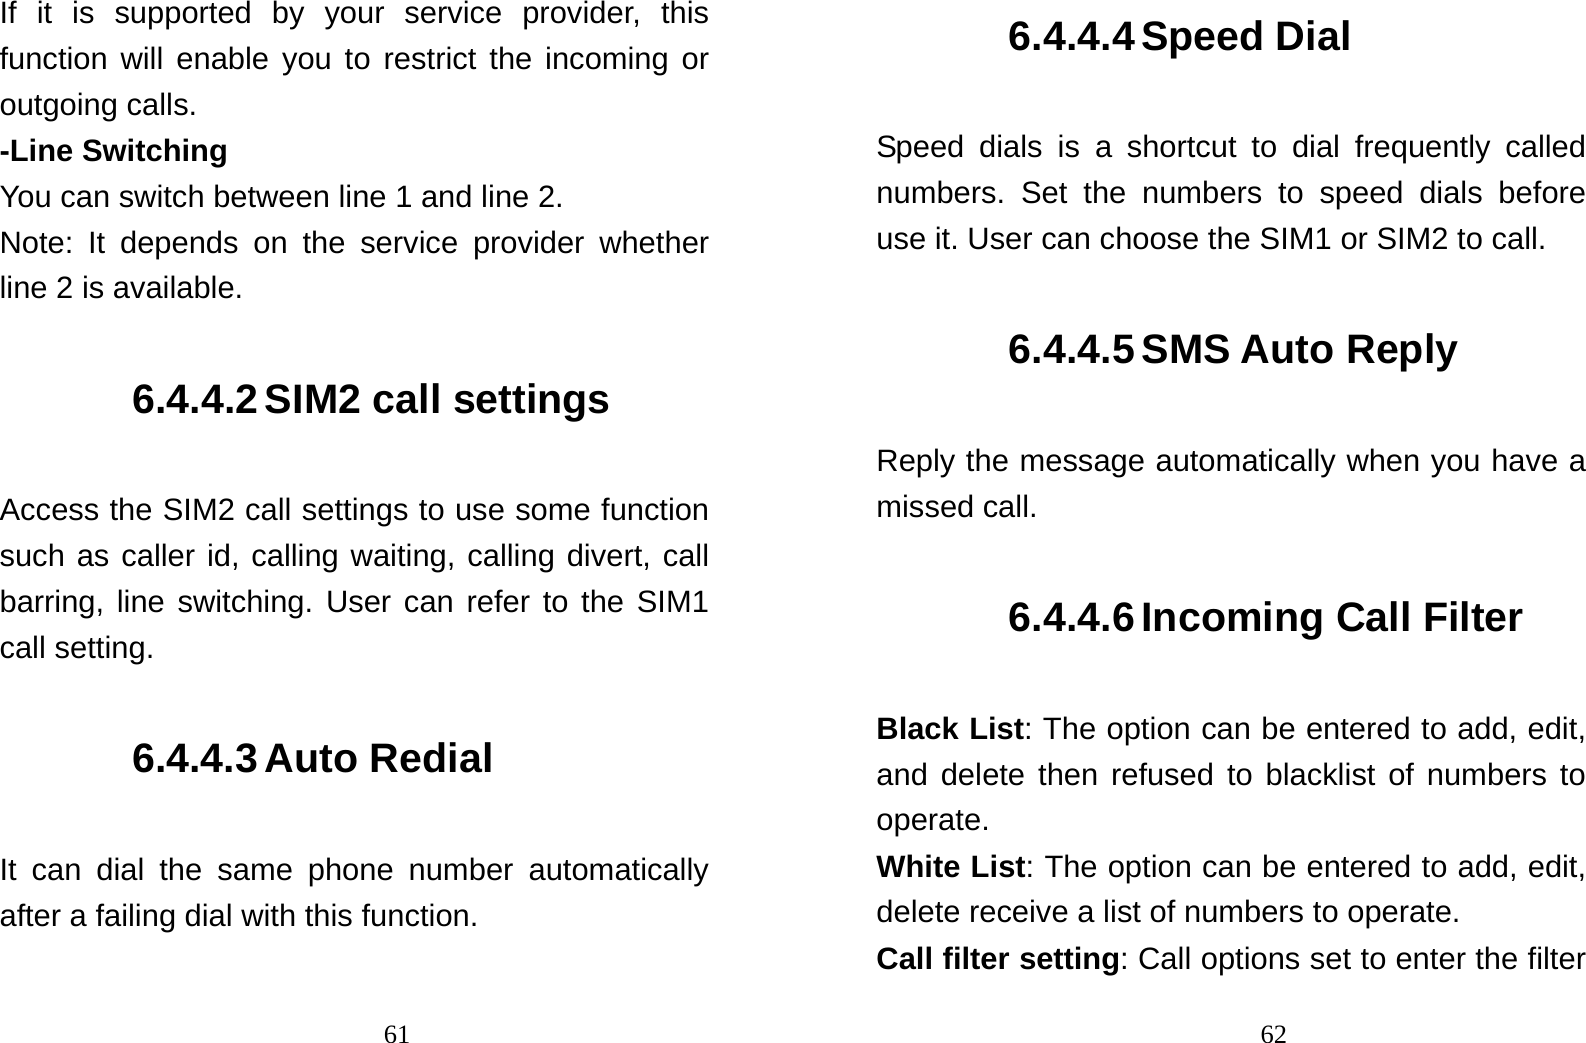                                61If it is supported by your service provider, this function will enable you to restrict the incoming or outgoing calls. -Line Switching You can switch between line 1 and line 2. Note: It depends on the service provider whether line 2 is available. 6.4.4.2 SIM2 call settings Access the SIM2 call settings to use some function such as caller id, calling waiting, calling divert, call barring, line switching. User can refer to the SIM1 call setting. 6.4.4.3 Auto Redial It can dial the same phone number automatically after a failing dial with this function.                                626.4.4.4 Speed Dial Speed dials is a shortcut to dial frequently called numbers. Set the numbers to speed dials before use it. User can choose the SIM1 or SIM2 to call. 6.4.4.5 SMS Auto Reply Reply the message automatically when you have a missed call. 6.4.4.6 Incoming Call Filter Black List: The option can be entered to add, edit, and delete then refused to blacklist of numbers to operate. White List: The option can be entered to add, edit, delete receive a list of numbers to operate. Call filter setting: Call options set to enter the filter 